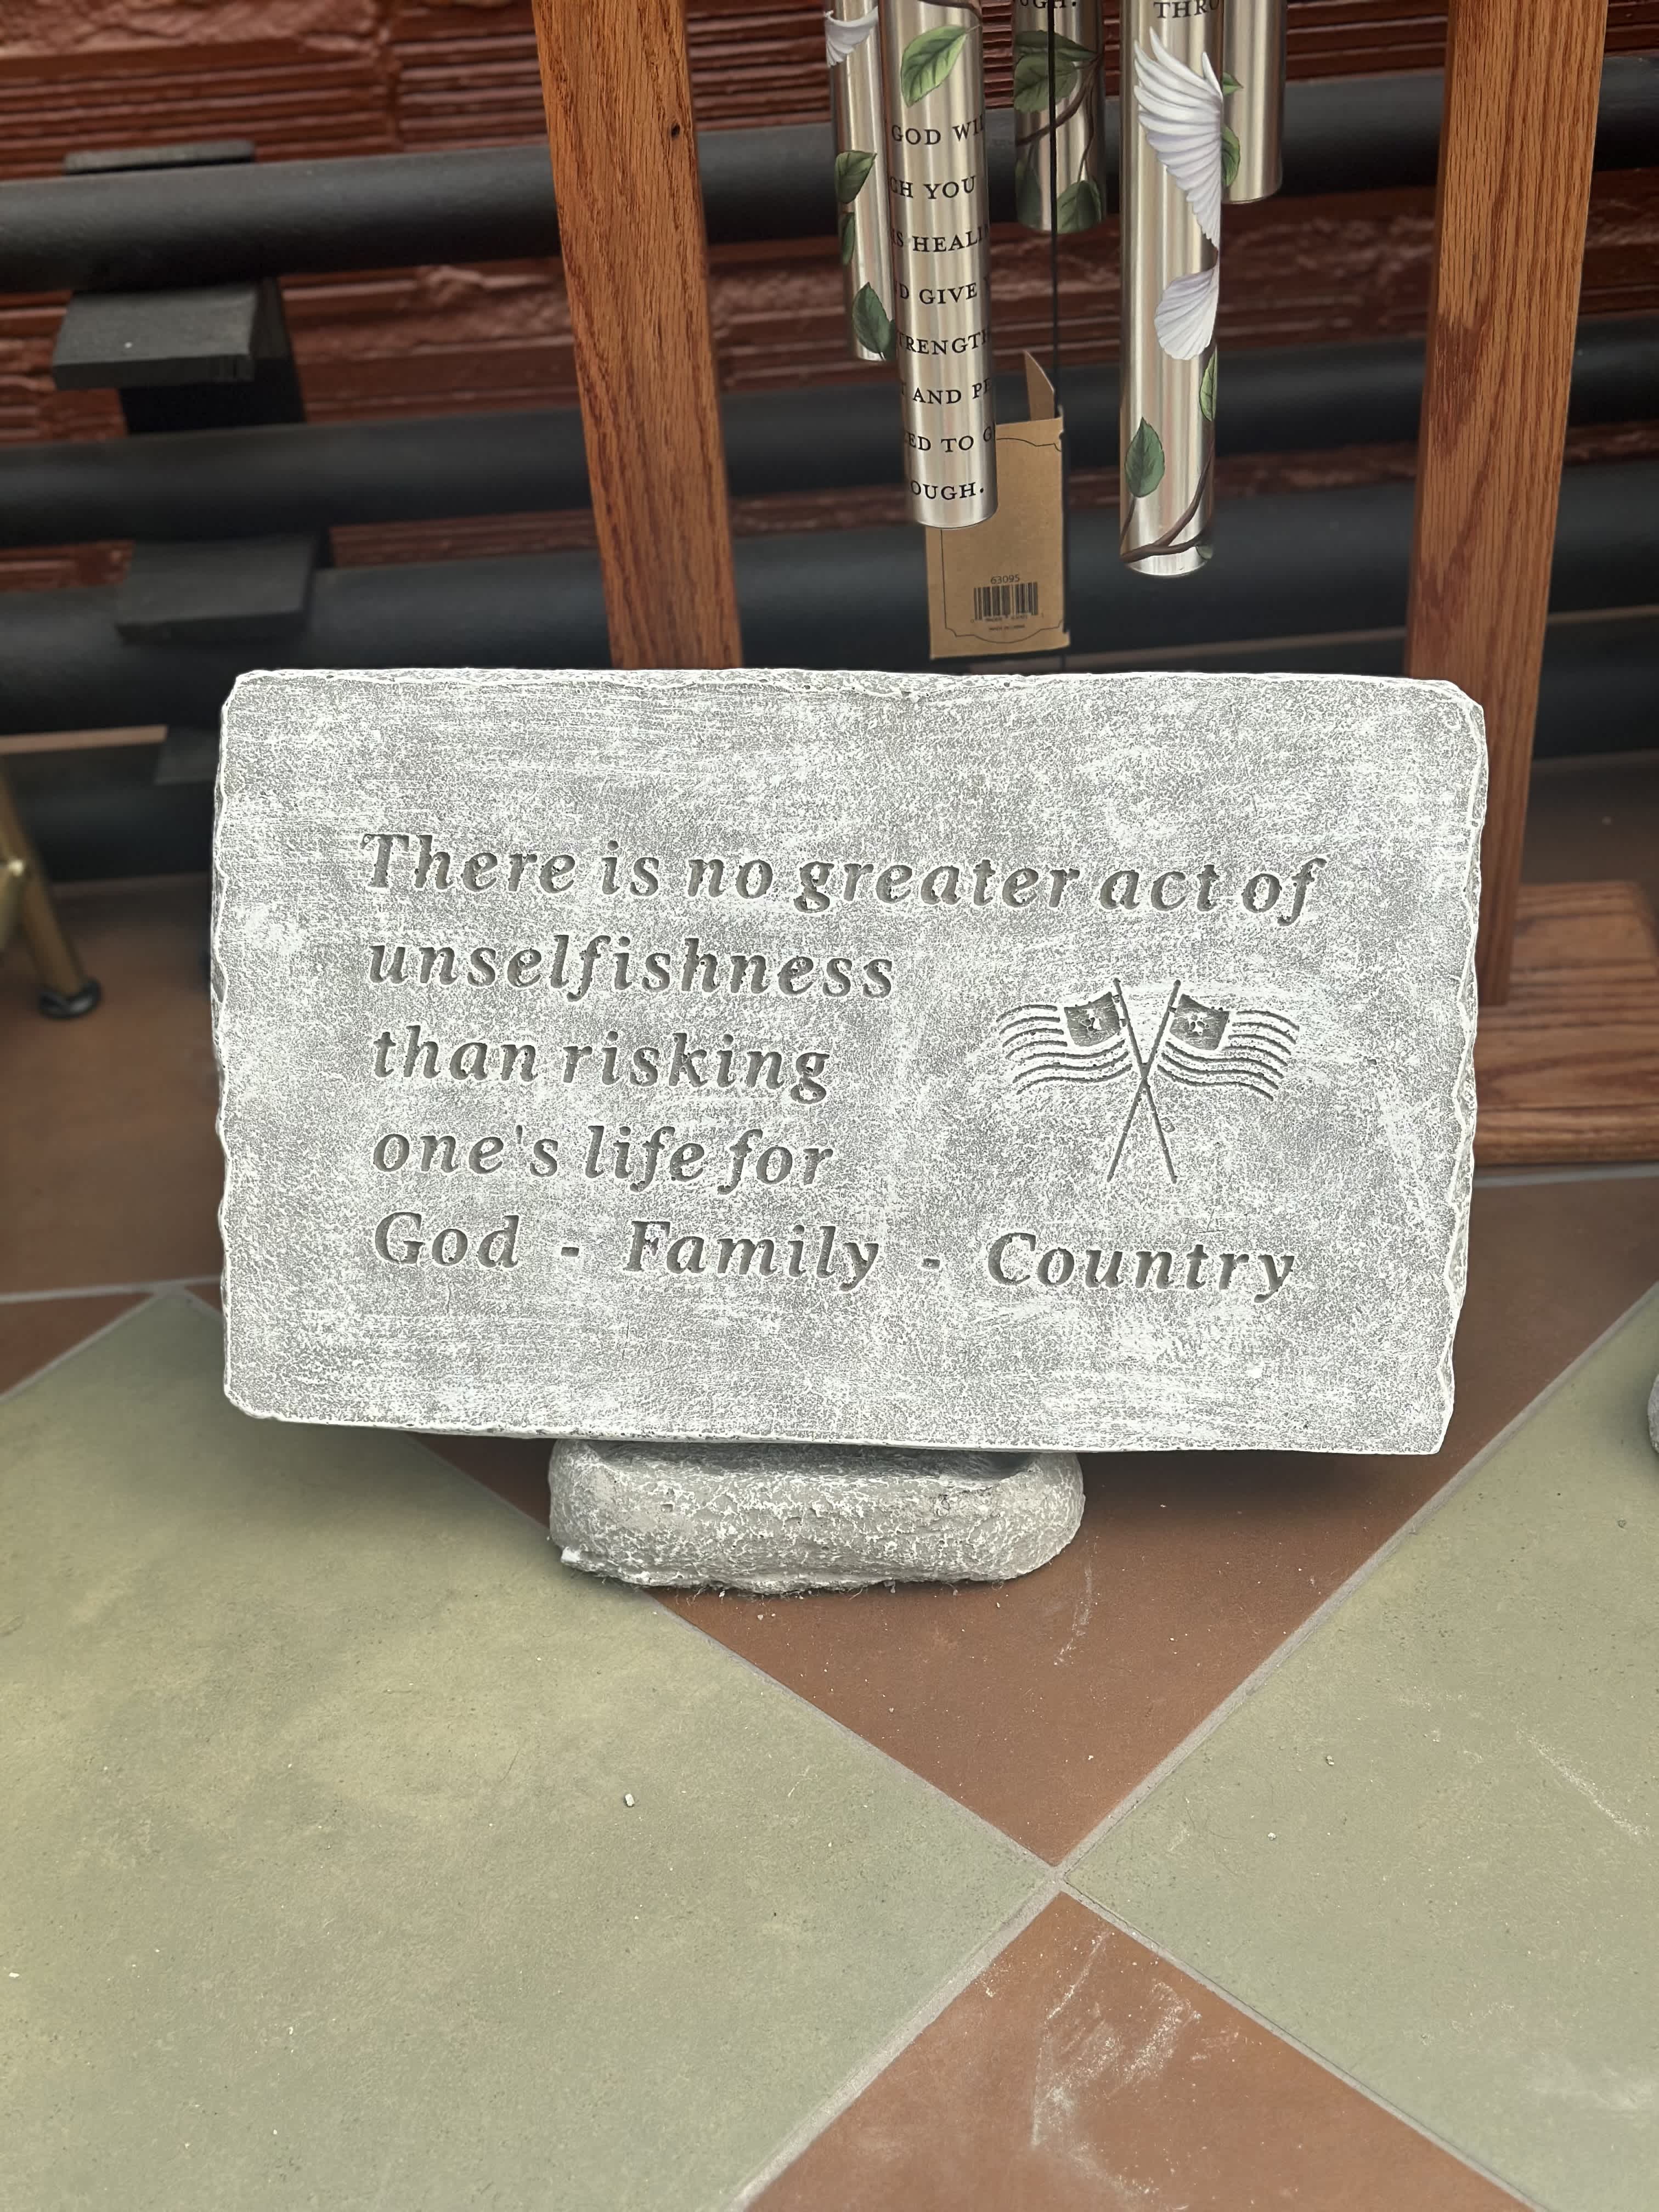 GOD -  FAMILY - COUNTRY  - There is no greater act of unselfishness than risking your life for God - Family - Country 